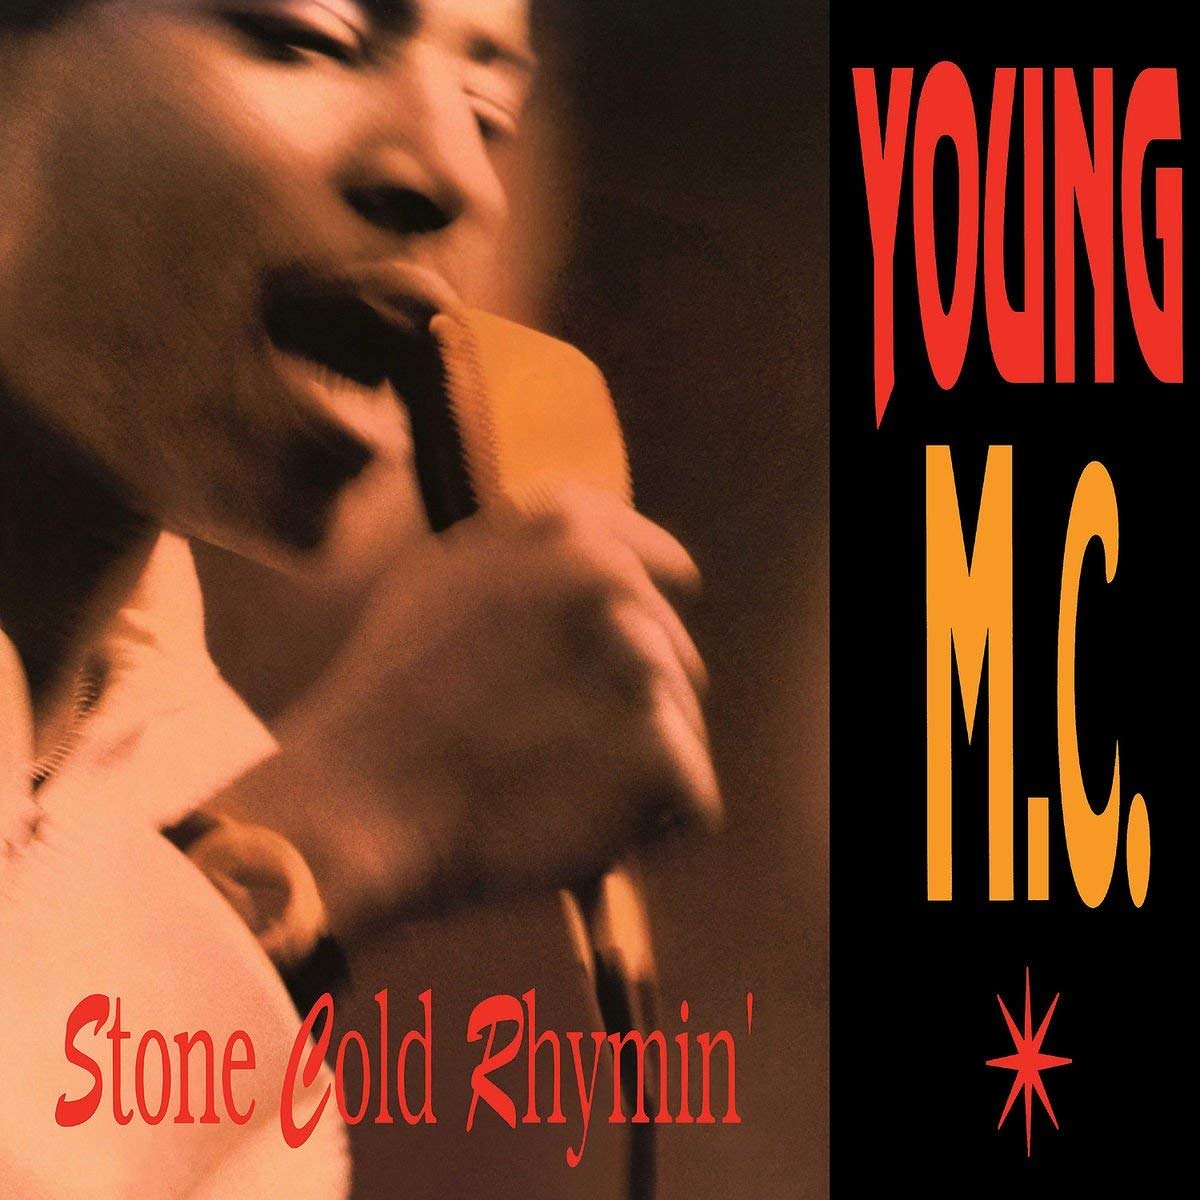 YOUNG MC / STONE COLD RHYMIN' "LP"